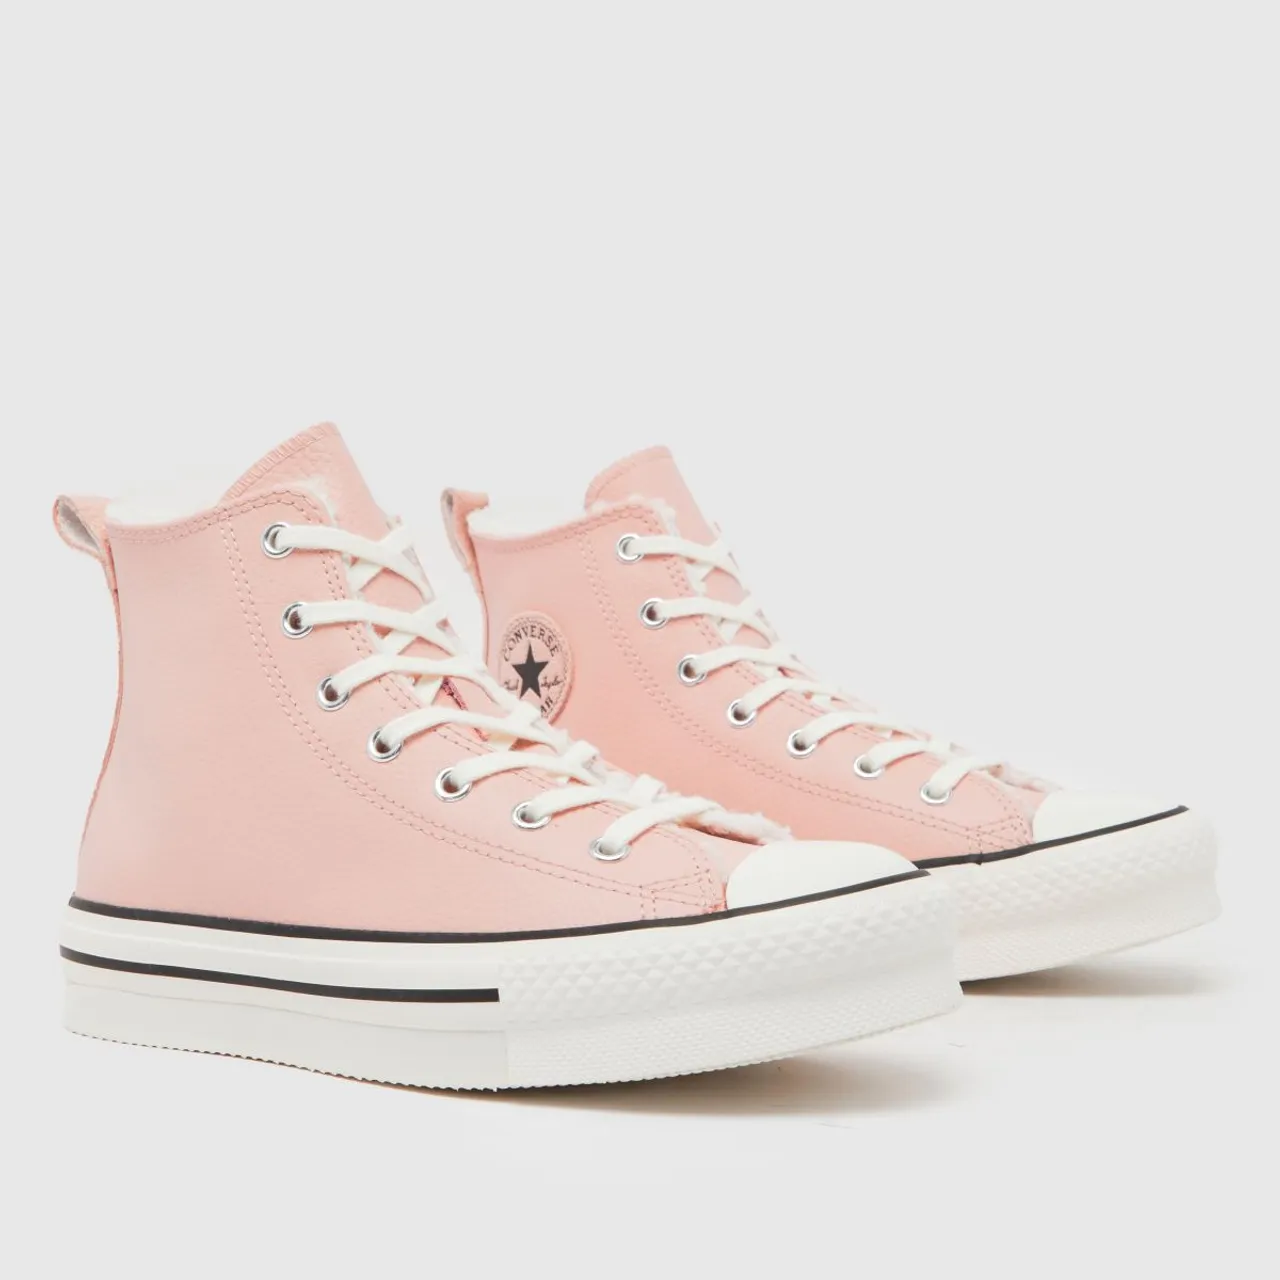 Converse Pink All Star Eva Lift Hi Girls Youth Trainers